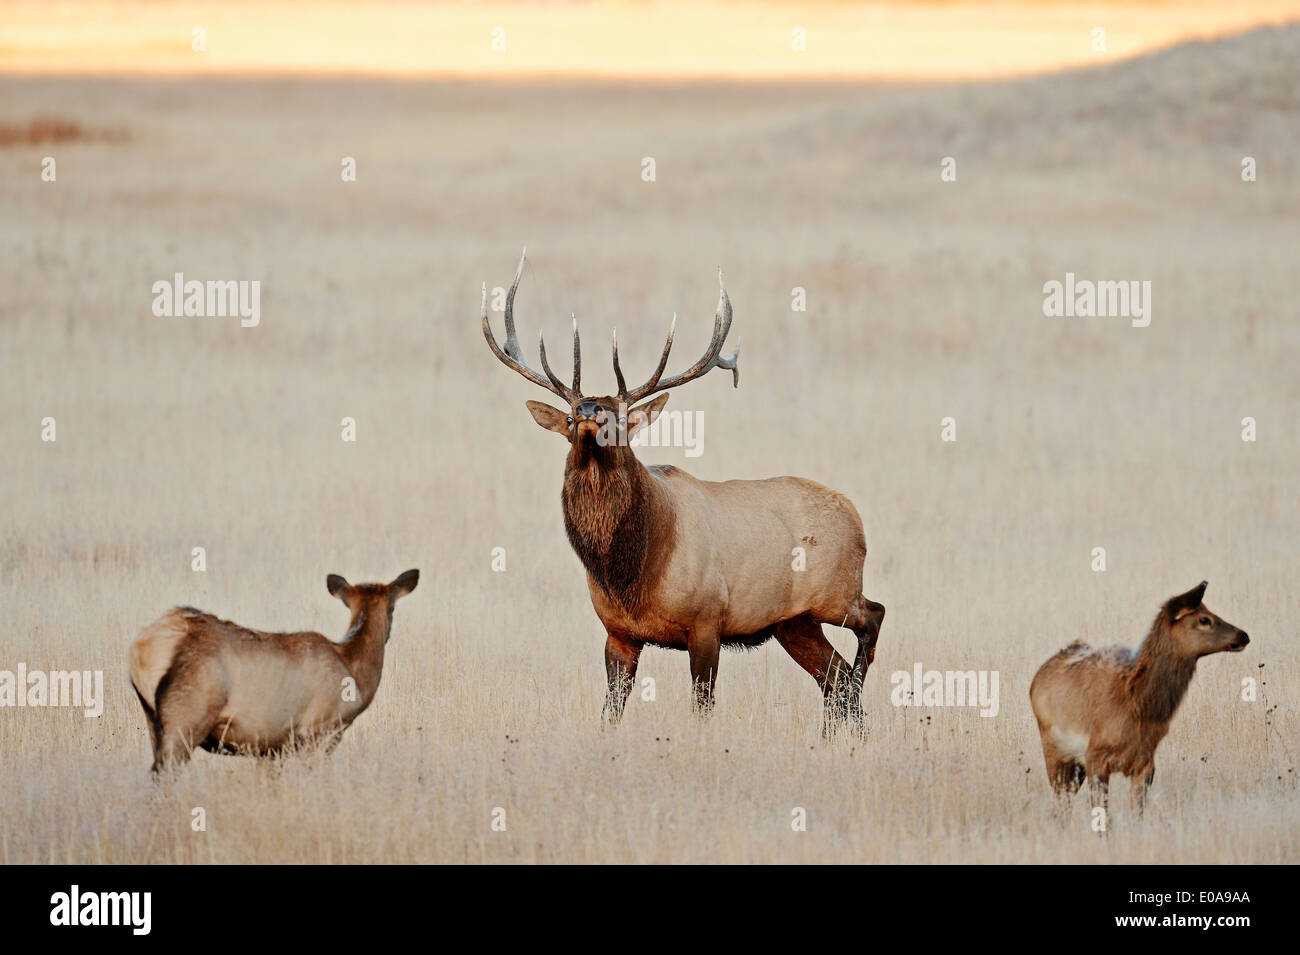 Wapiti or Elk (Cervus canadensis, Cervus elaphus canadensis), male and females in rut, Yellowstone national park, Wyoming, USA Stock Photo